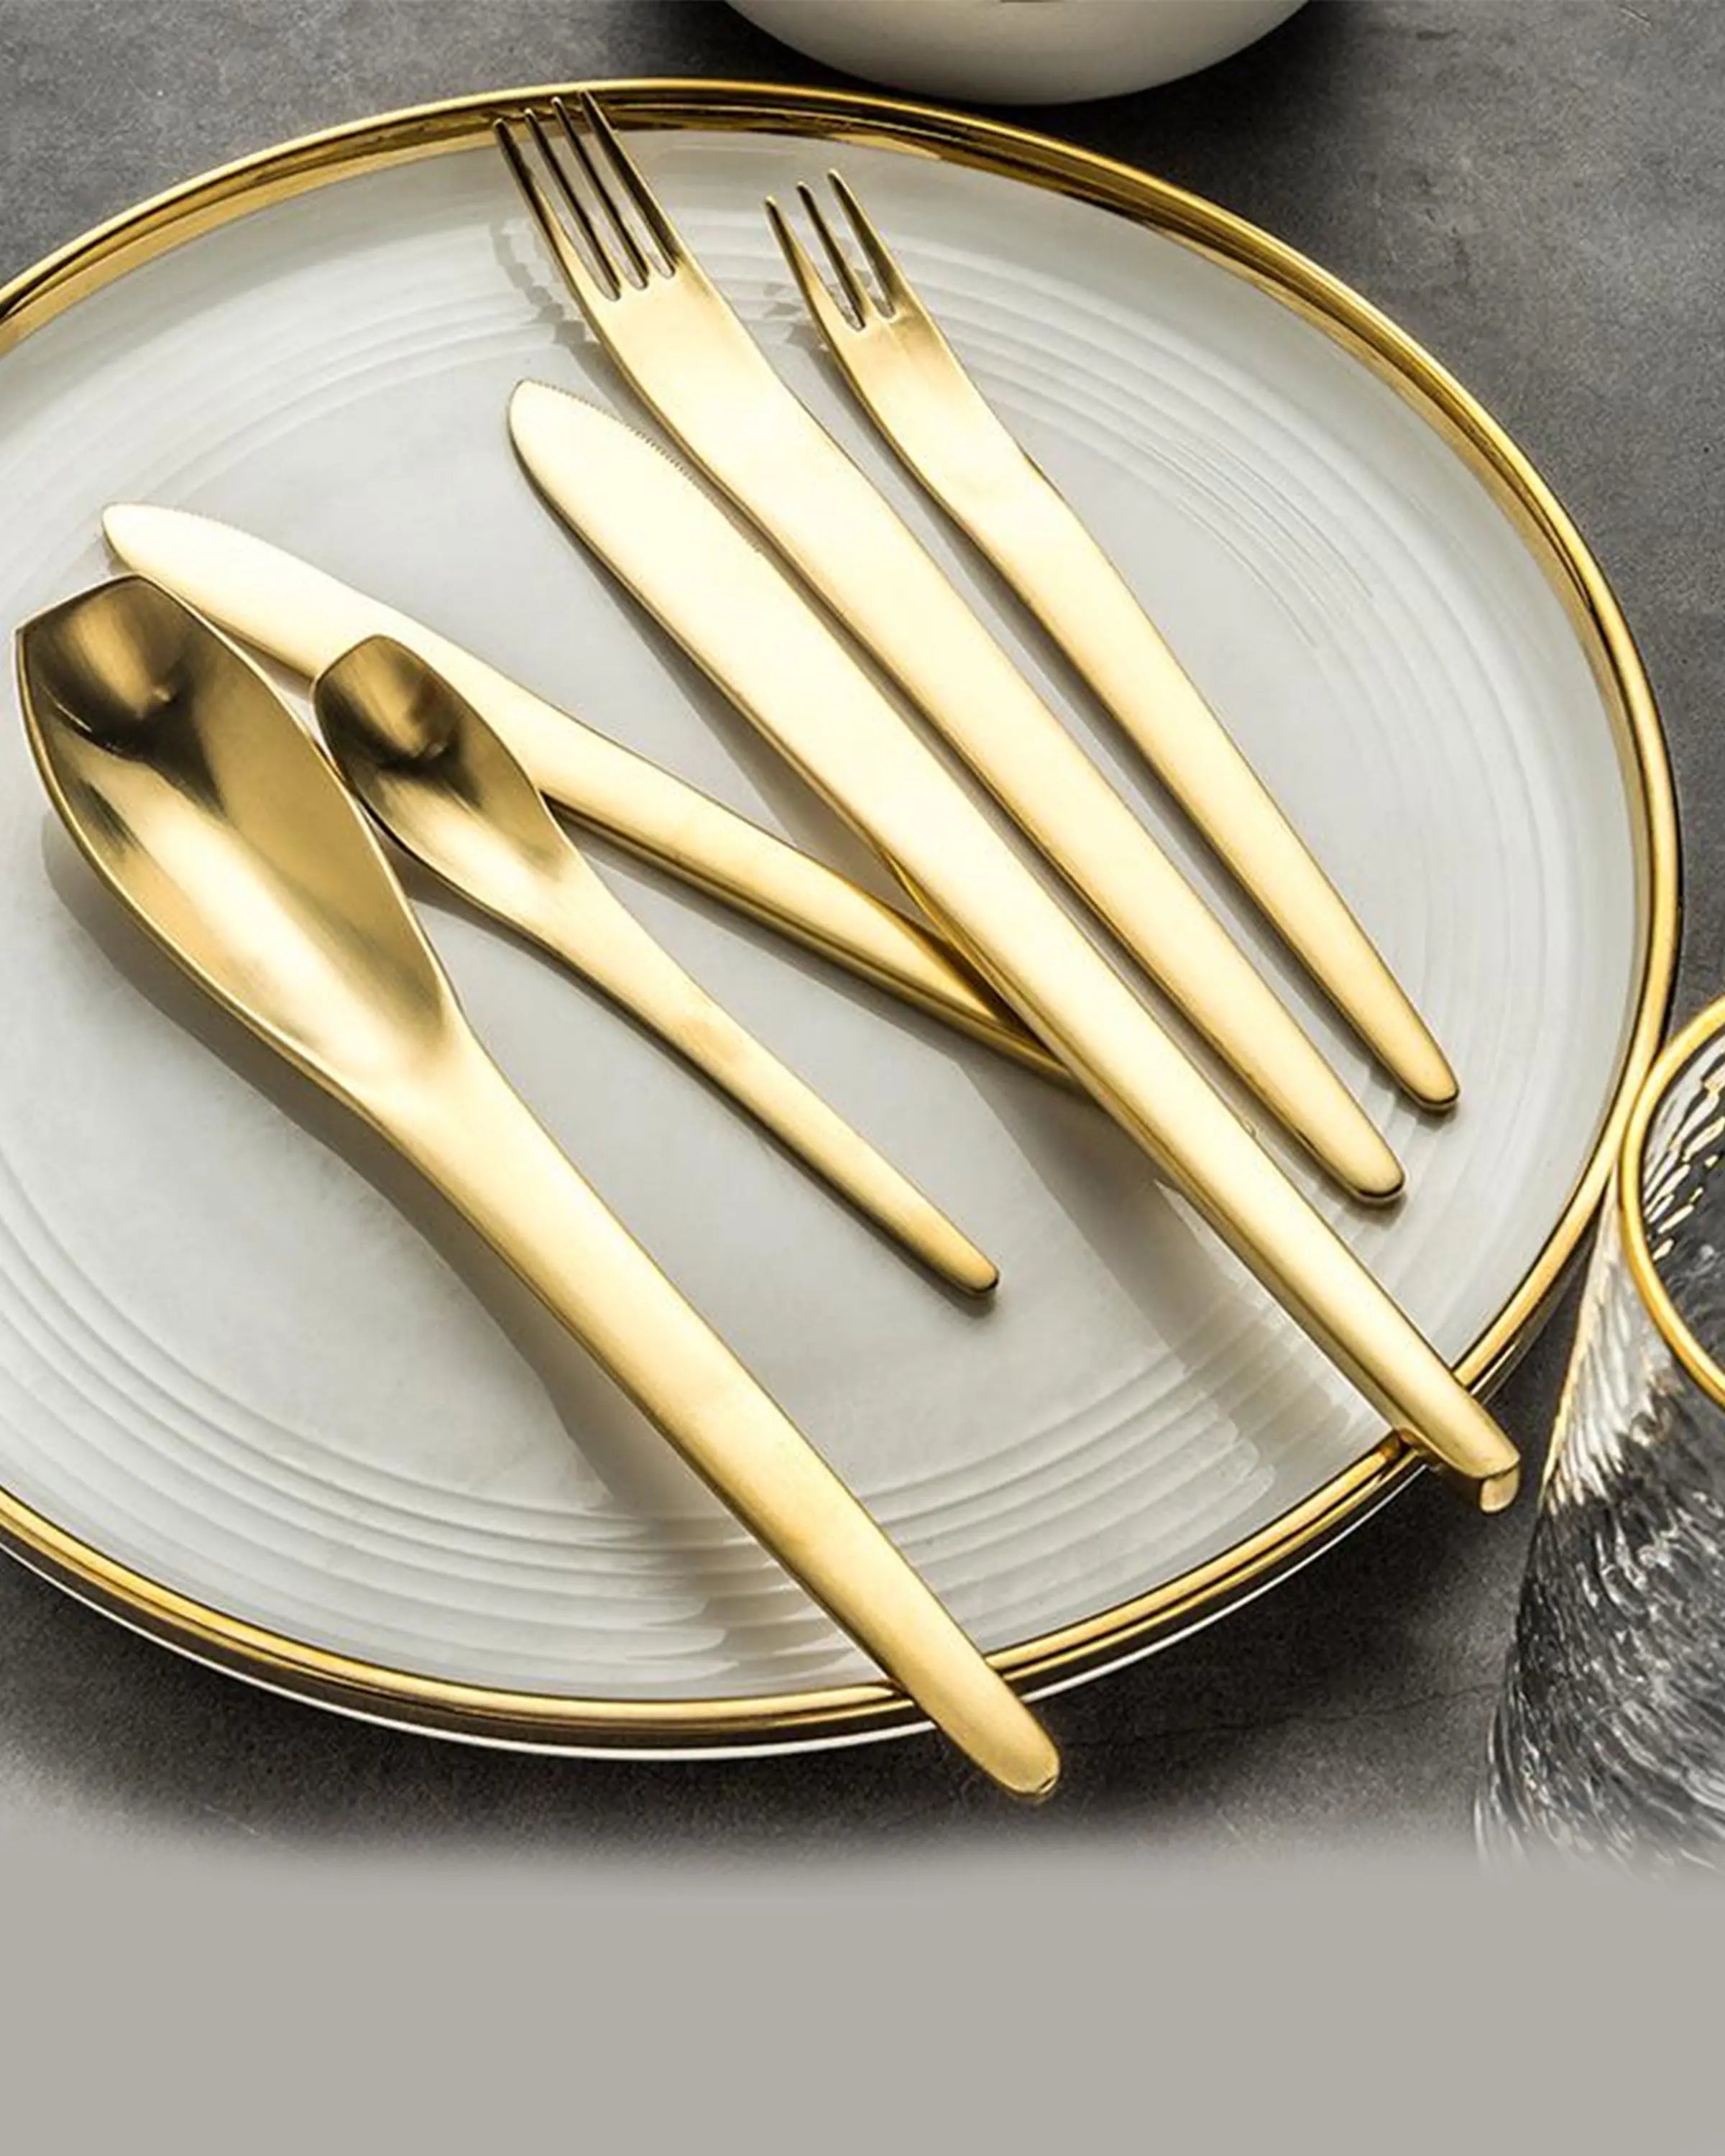 Bennett Gold Finish Cutlery ANGIE HOMES